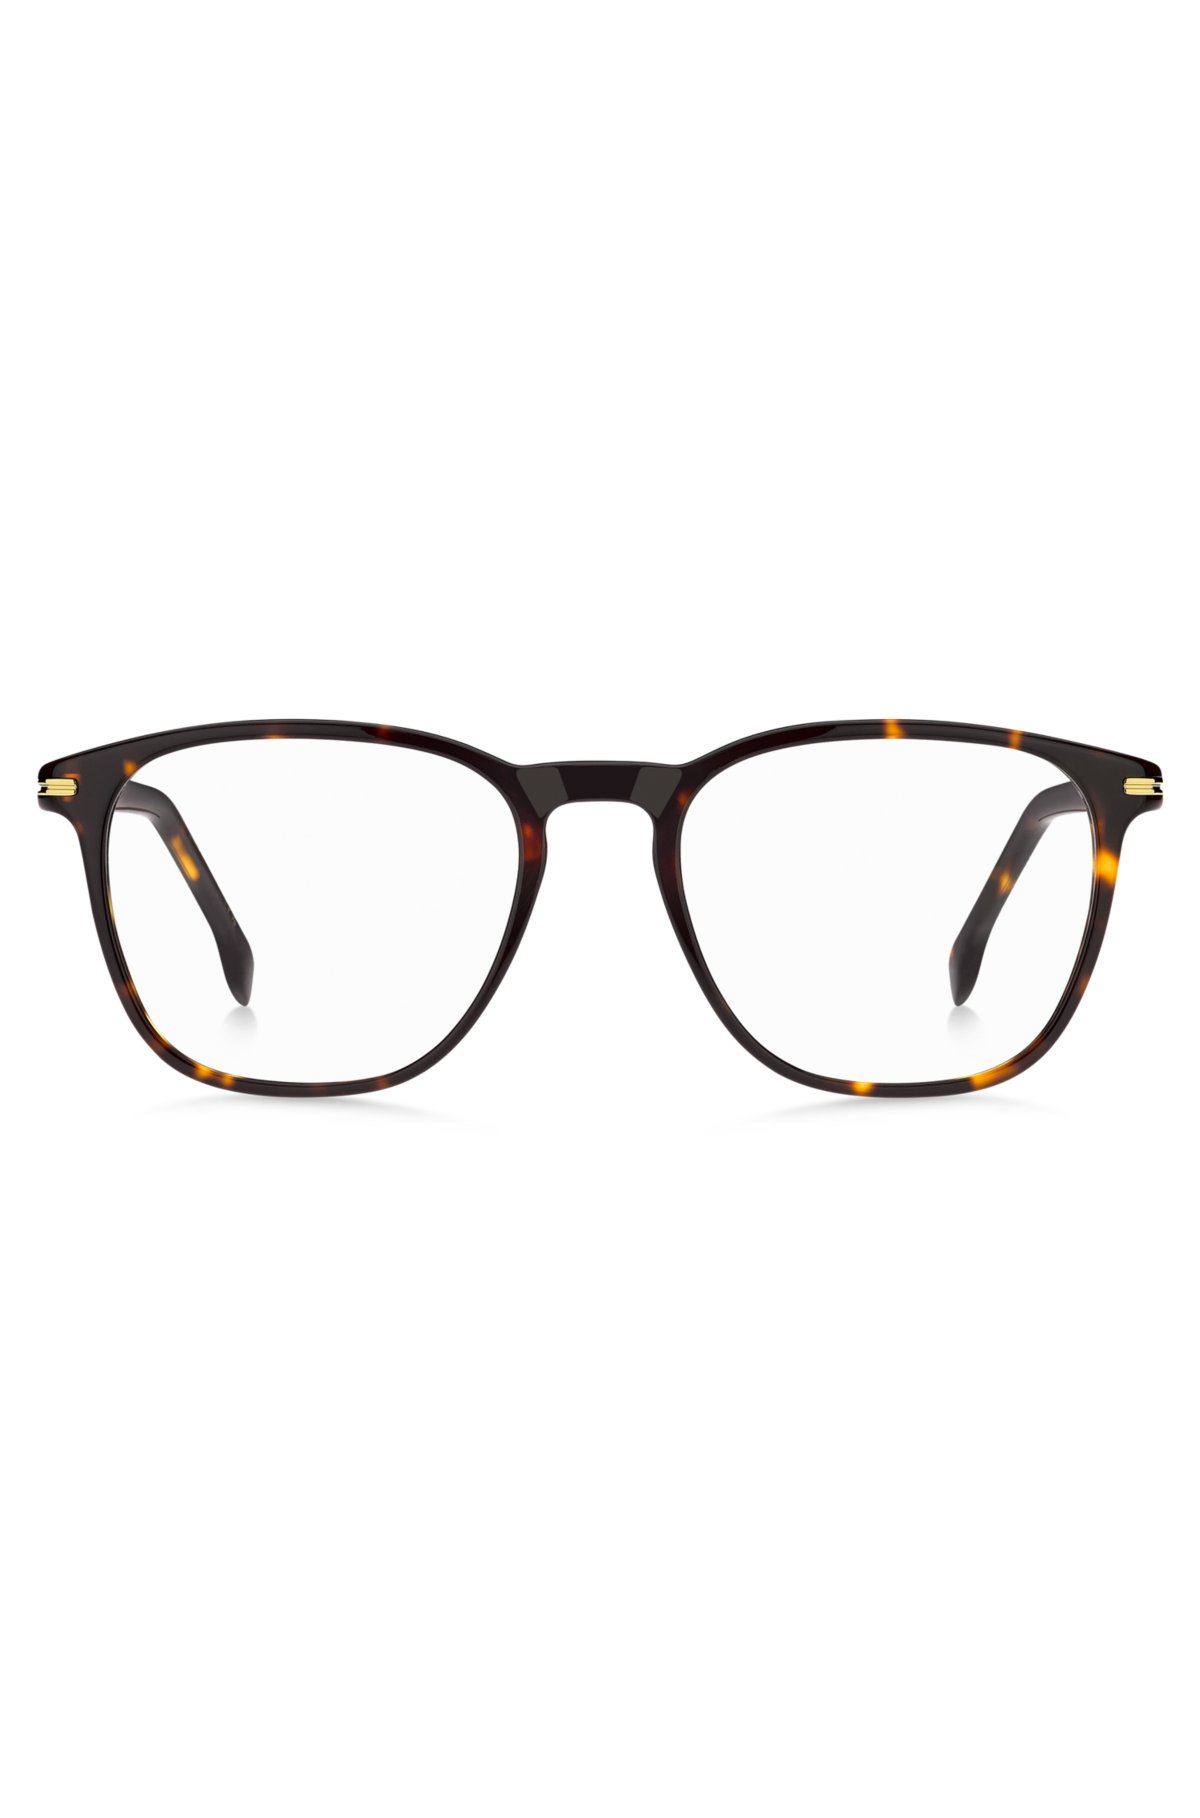 Havana-acetate optical frames with gold-tone hardware, Brown